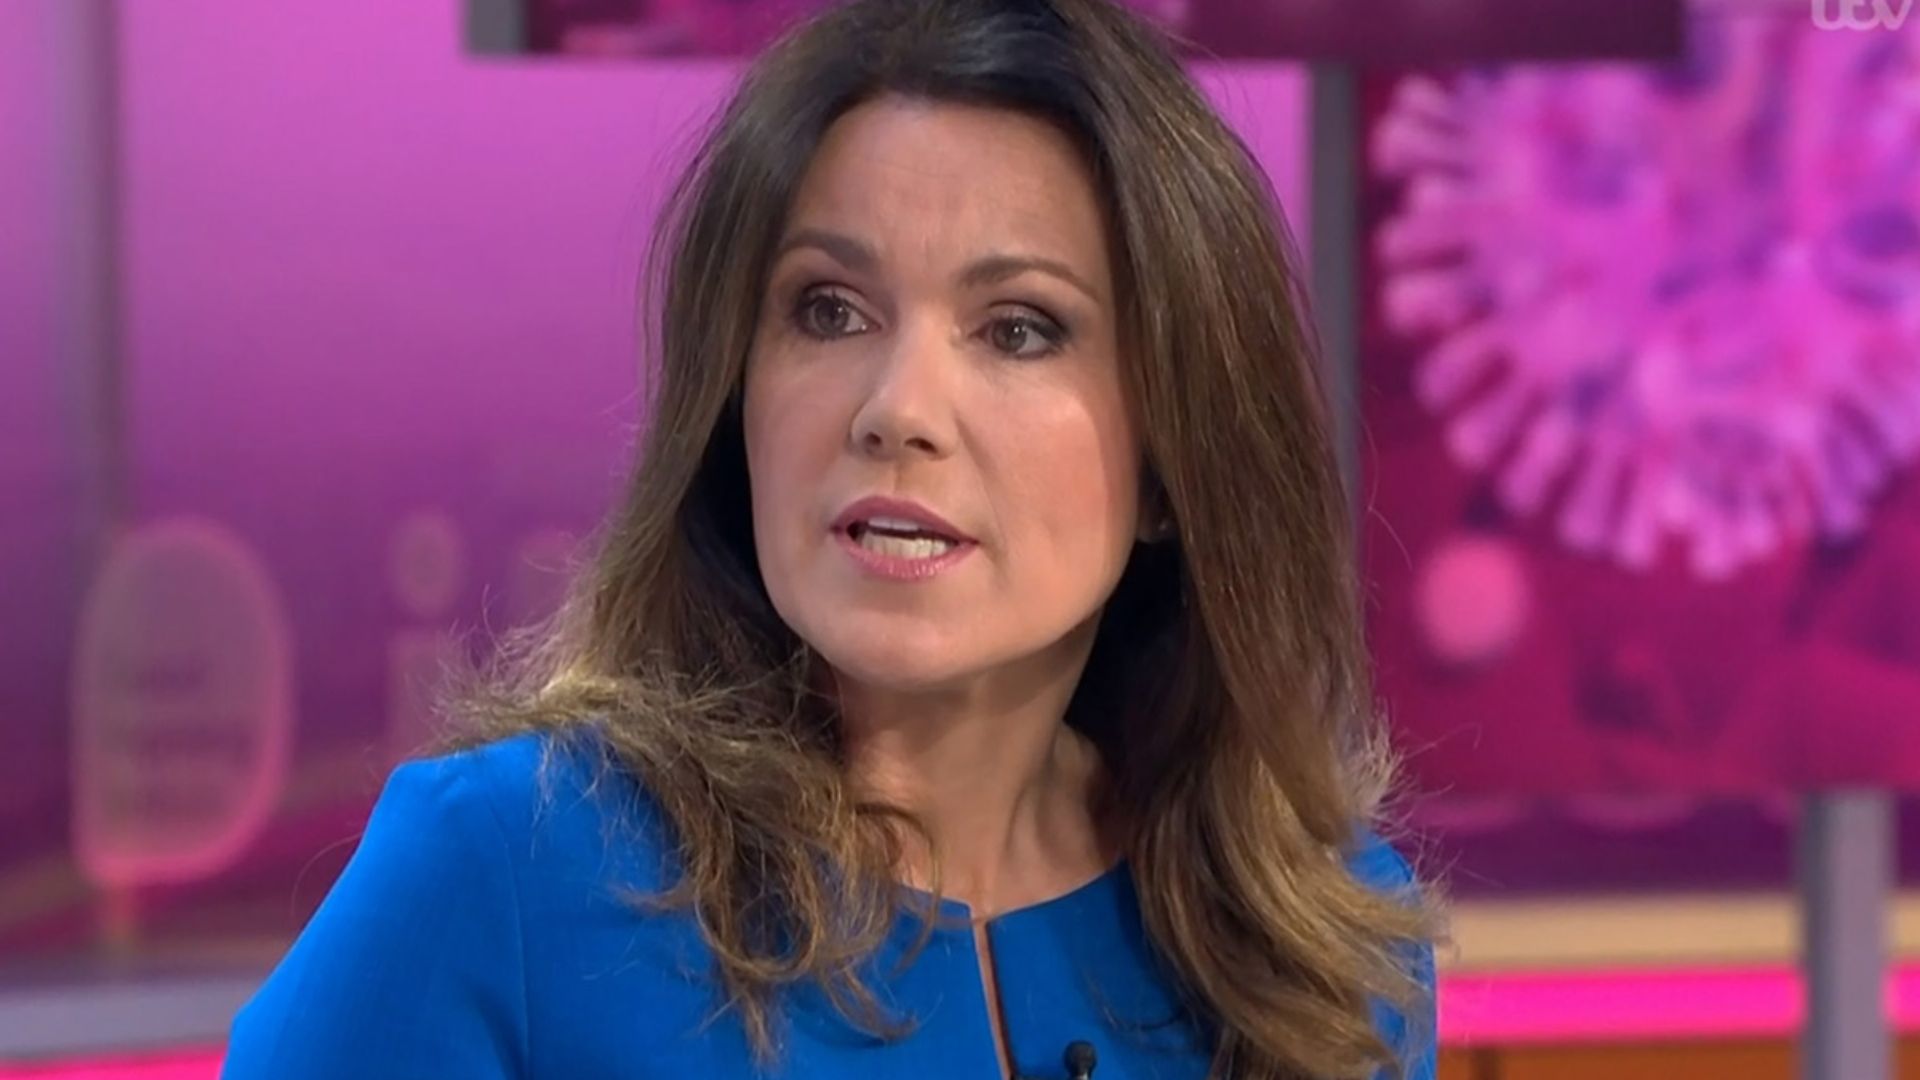 Susanna Reid returns to GMB in a fitted blue dress following two-week self-isolation